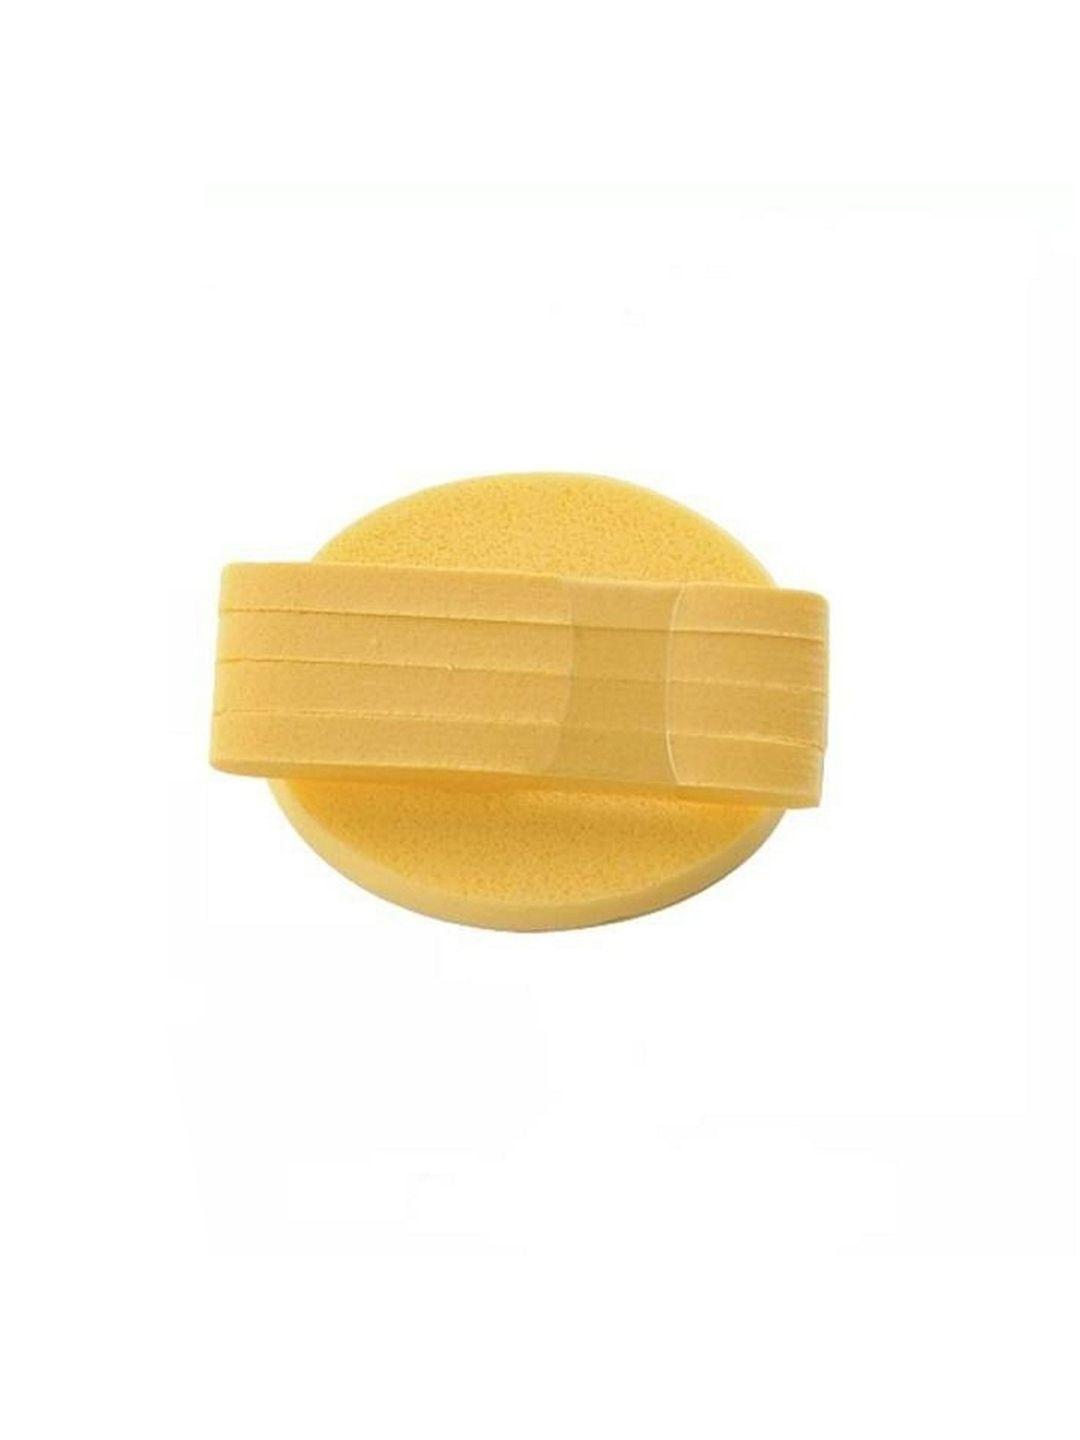 basicare set of 5 pva compressed 1053 facial cleansing sponge - yellow